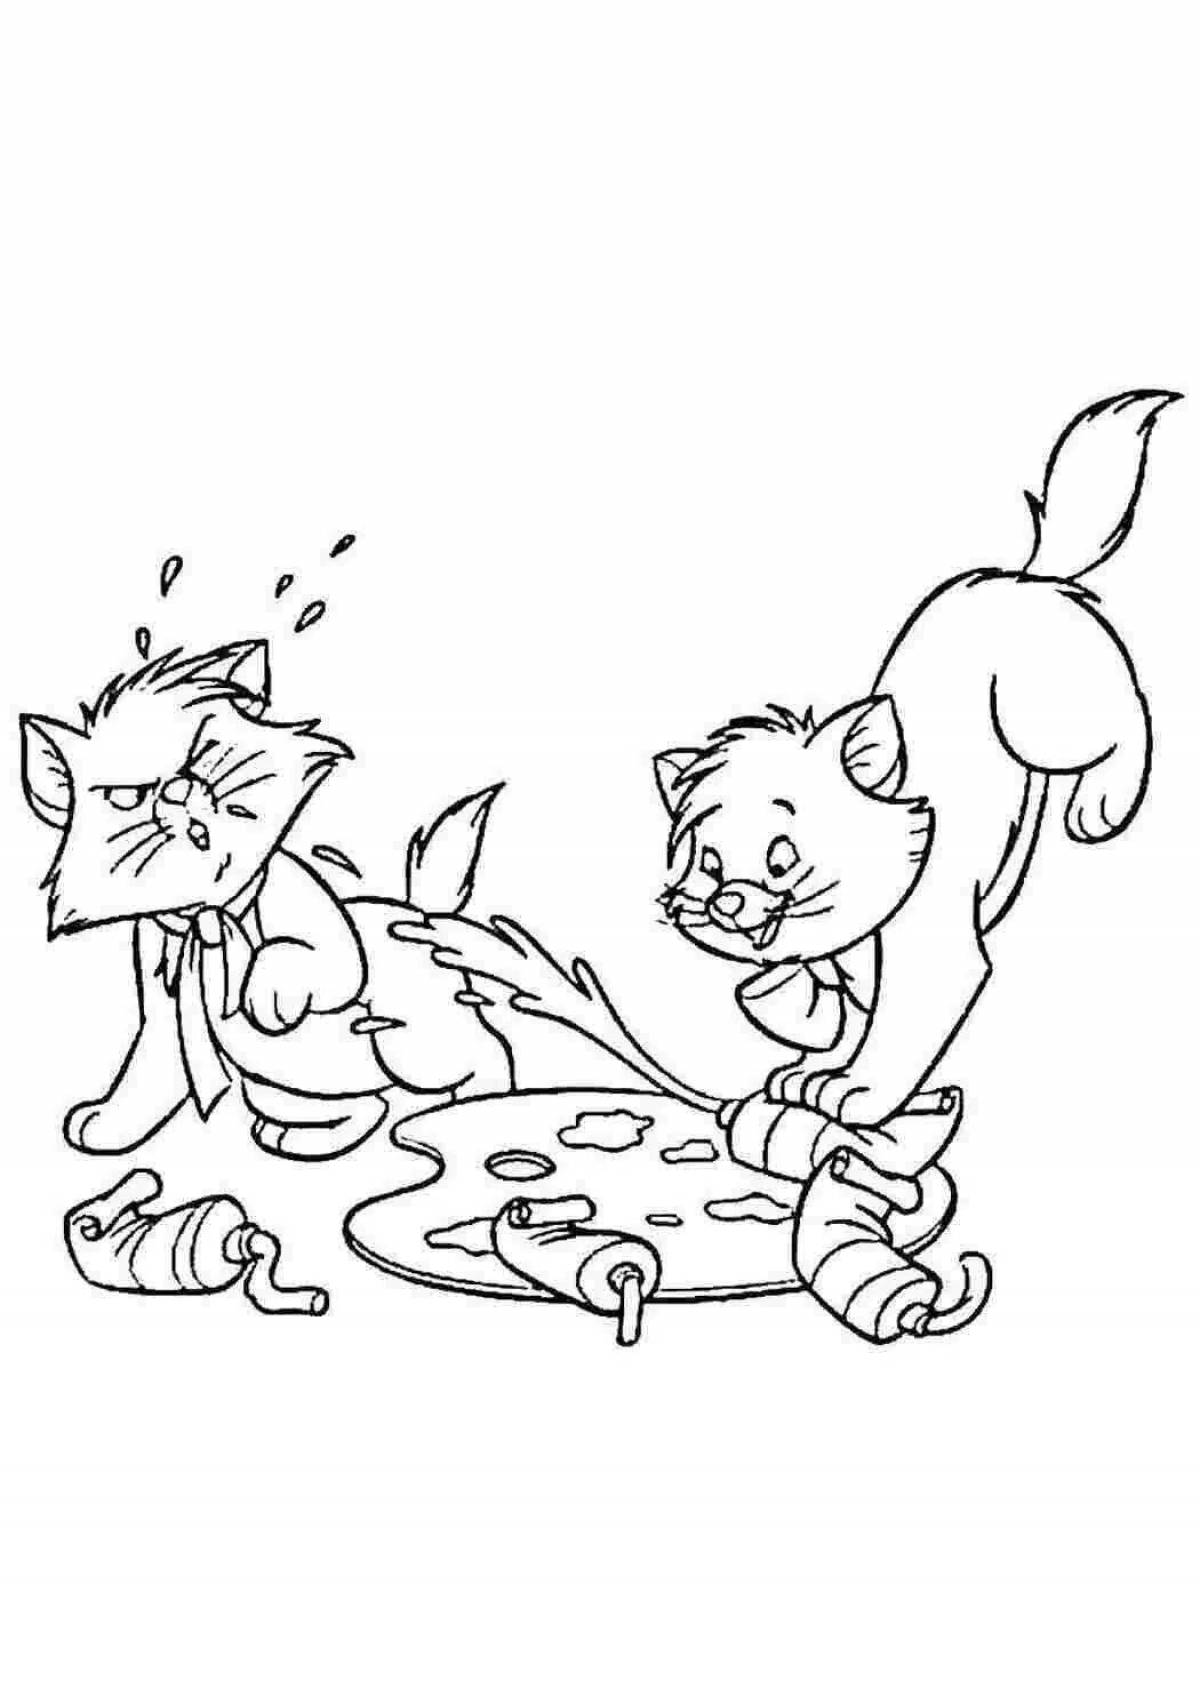 Exciting big cat escape coloring page